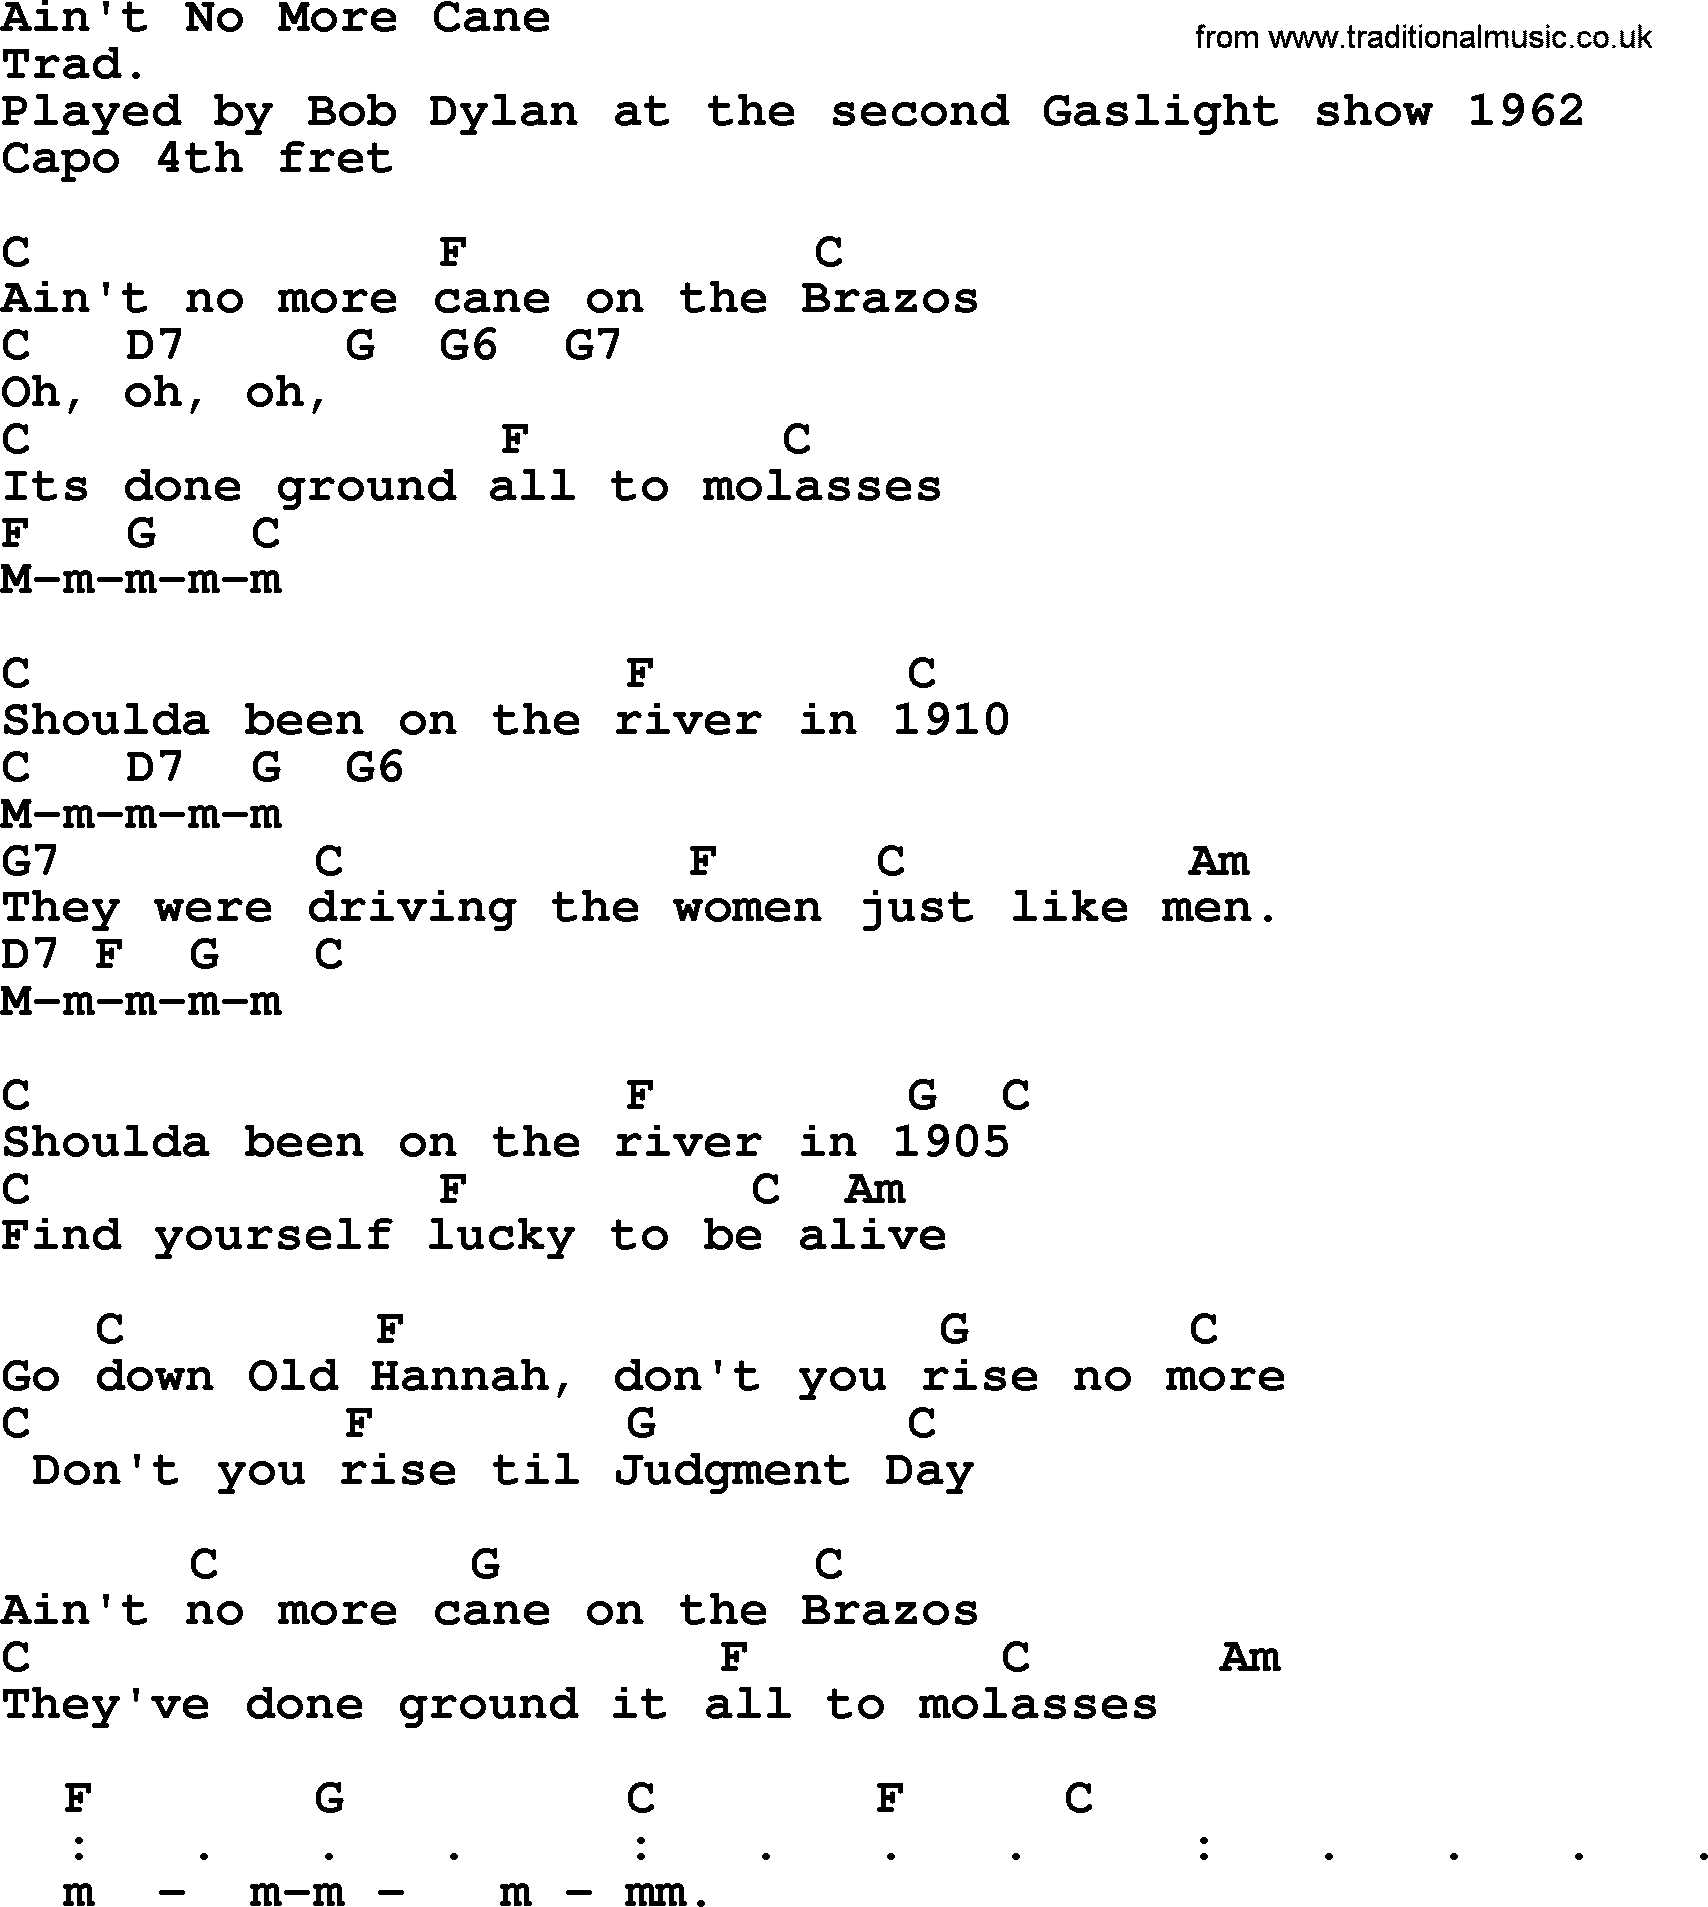 Bob Dylan song, lyrics with chords - Ain't No More Cane